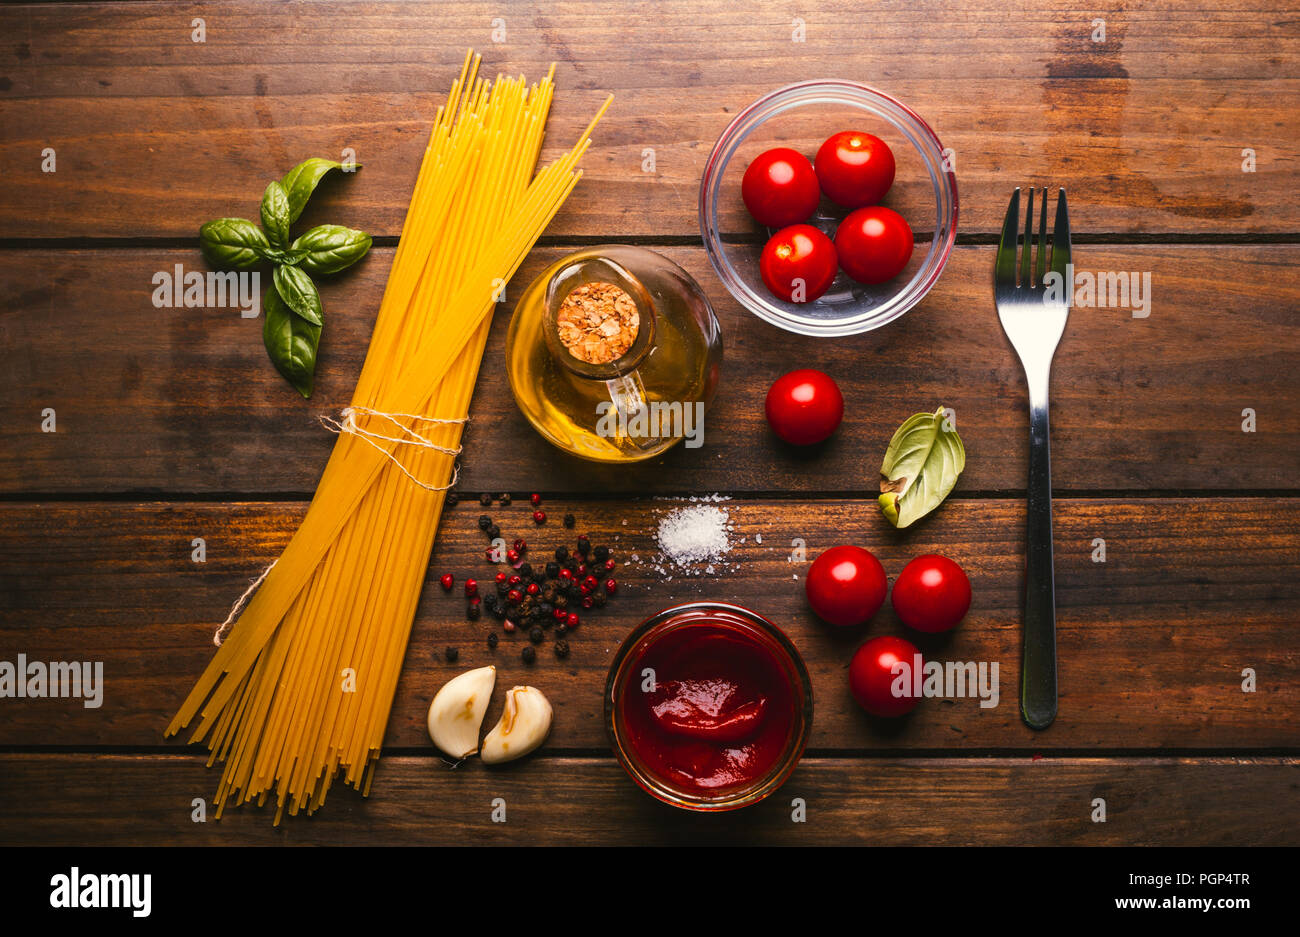 Pasta with various ingredients for cooking Italian food, on a rustic wooden table Stock Photo